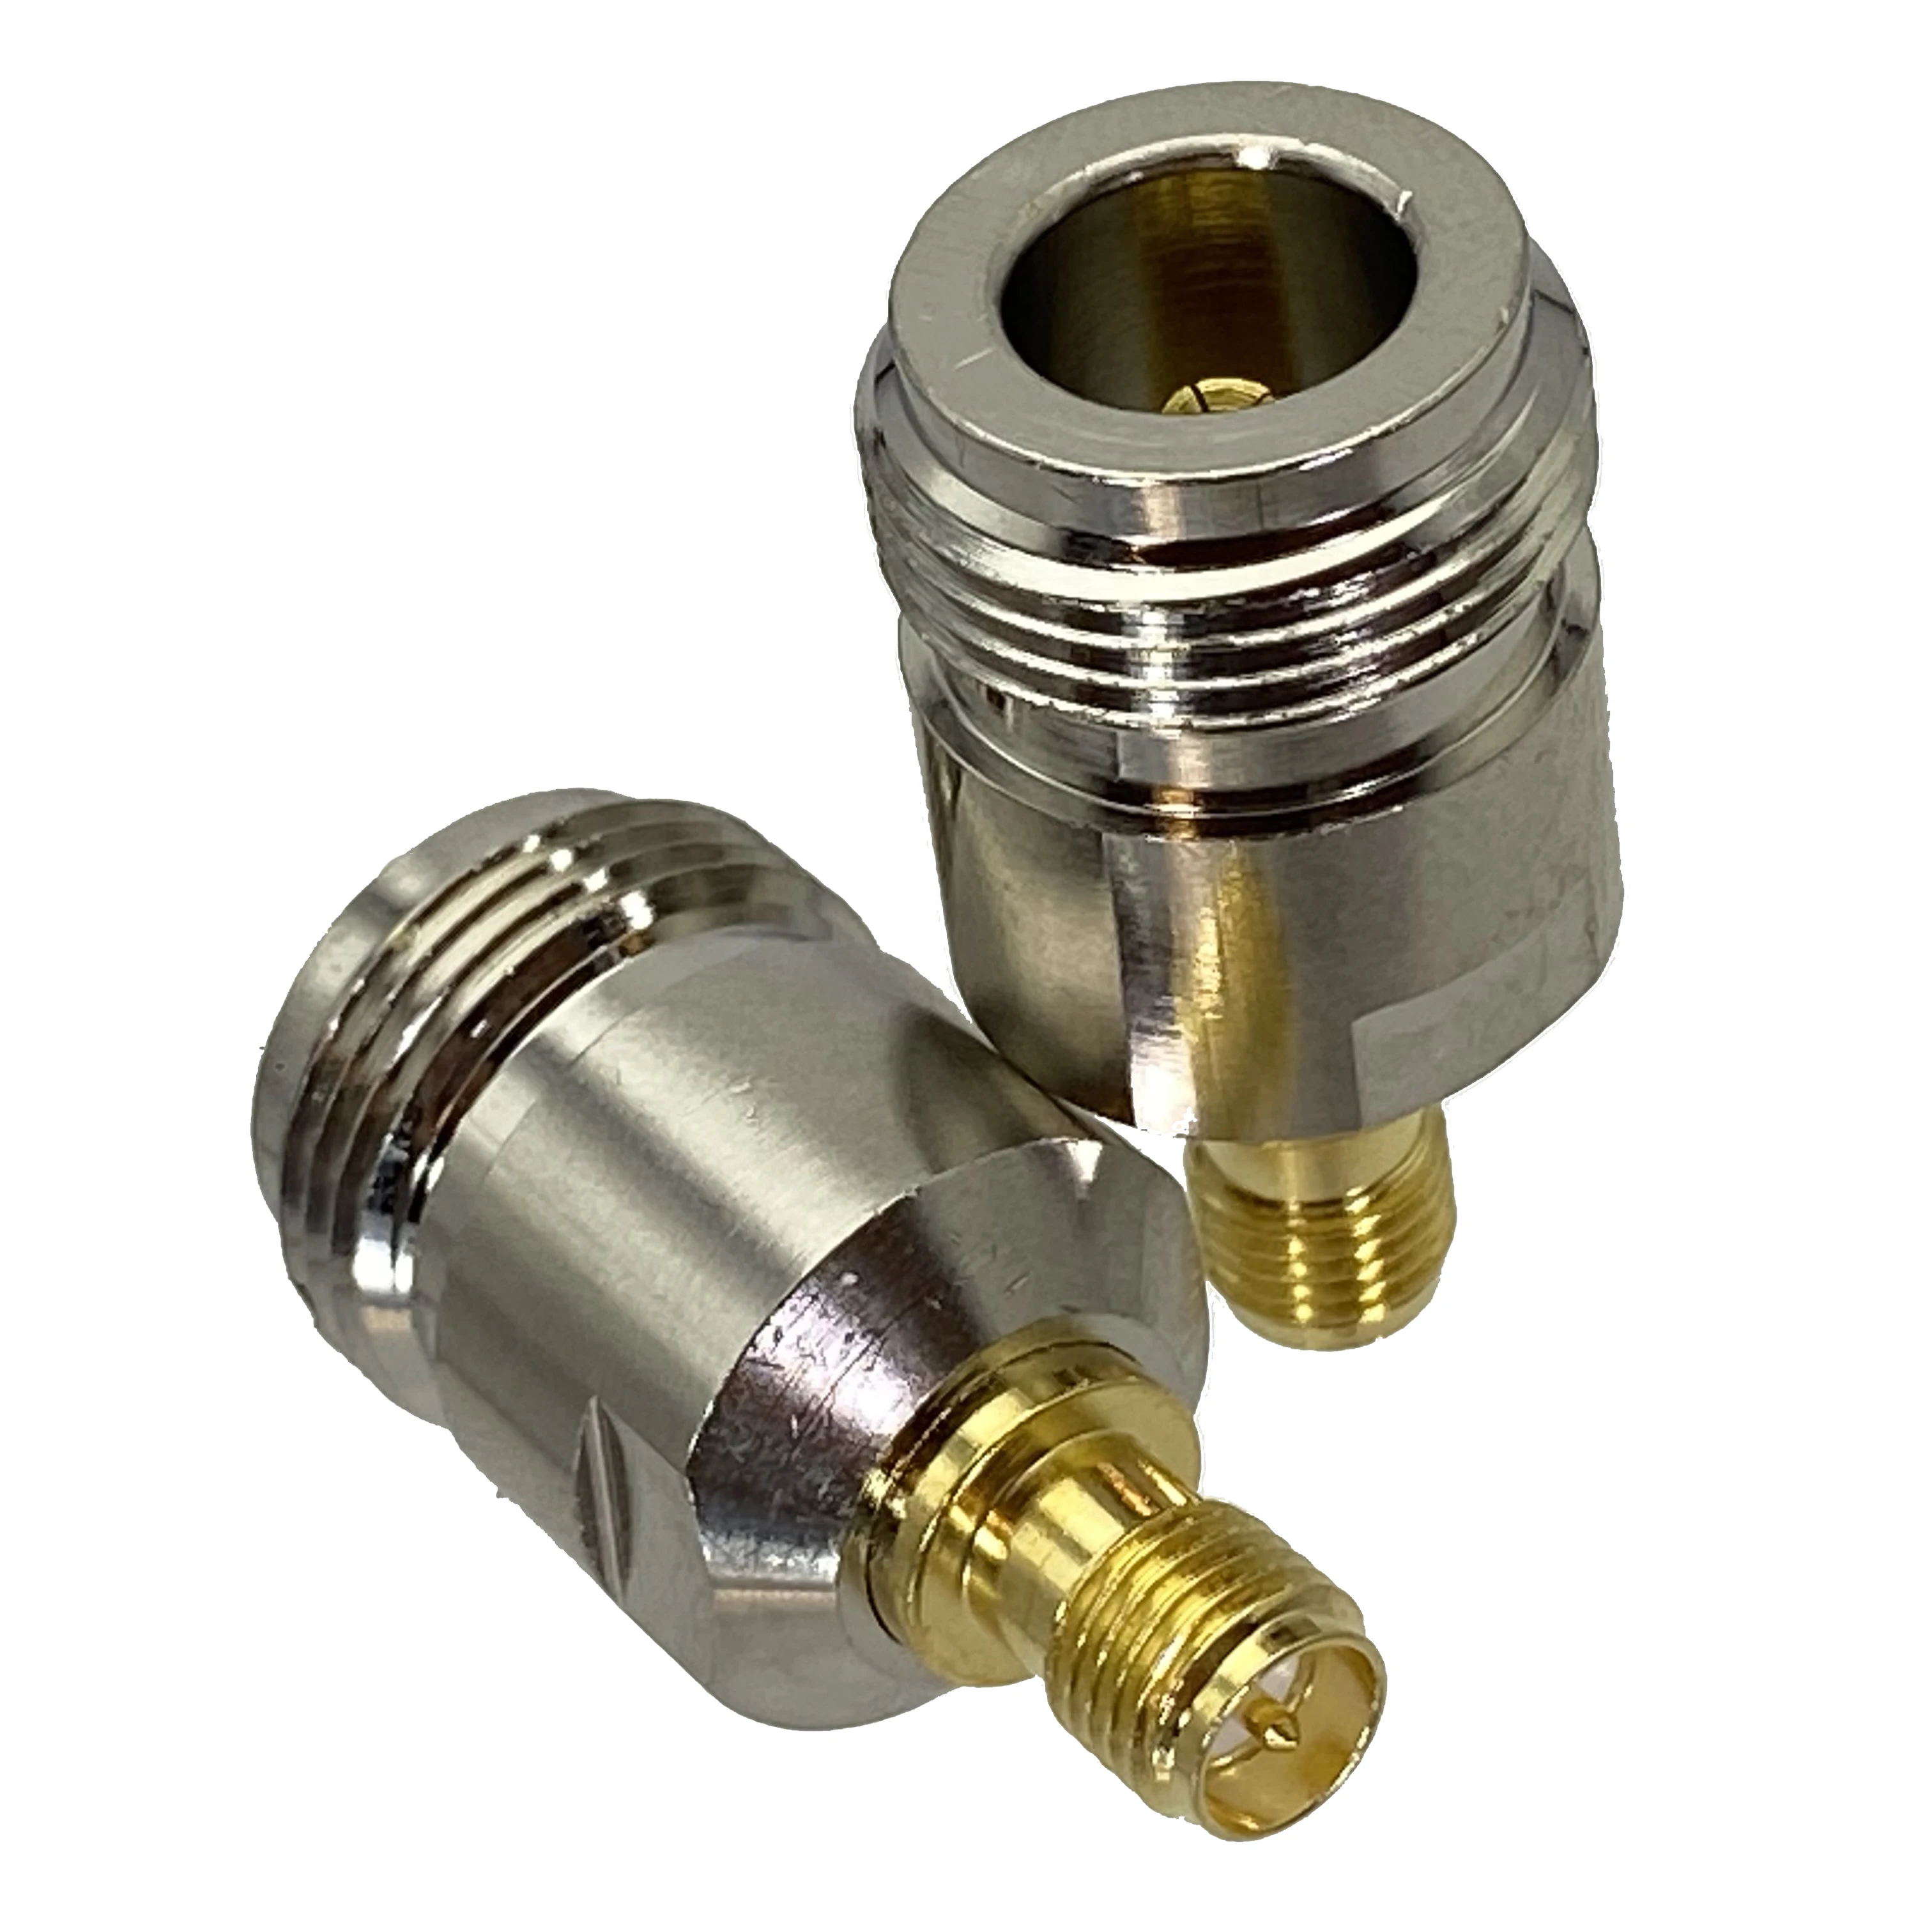 1pcs-n-female-jack-to-rp-sma-female-plug-center-rf-coaxial-adapter-connector-wire-terminals-50ohm